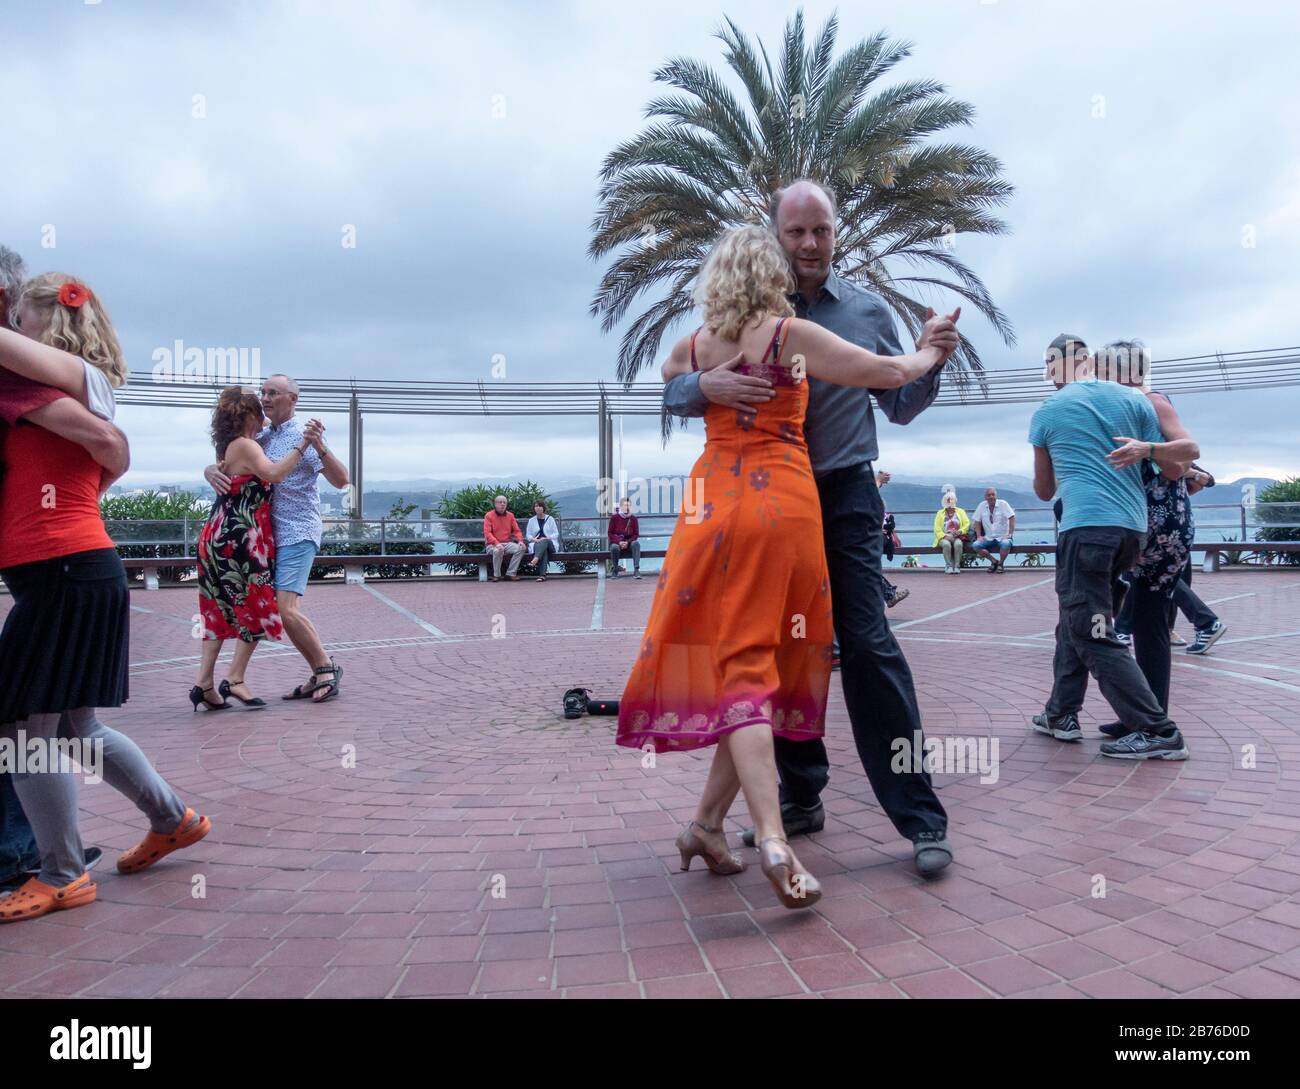 Las Palmas, Gran Canaria, Canary Islands, Spain. 13th March 2020. As the Spanish Prime Minister declares a state of emergency to combat the Coronavirus outbreak, dancers who are on Gran Canaria for an international Tango festival, which has been cancelled, dance on the seafront in Las Palmas on Gran Canaria at dusk. The Impact of travel restrictions and reduced number of tourists is a major concern for the local economy. Credit: Alan Dawson/Alamy Live News Stock Photo